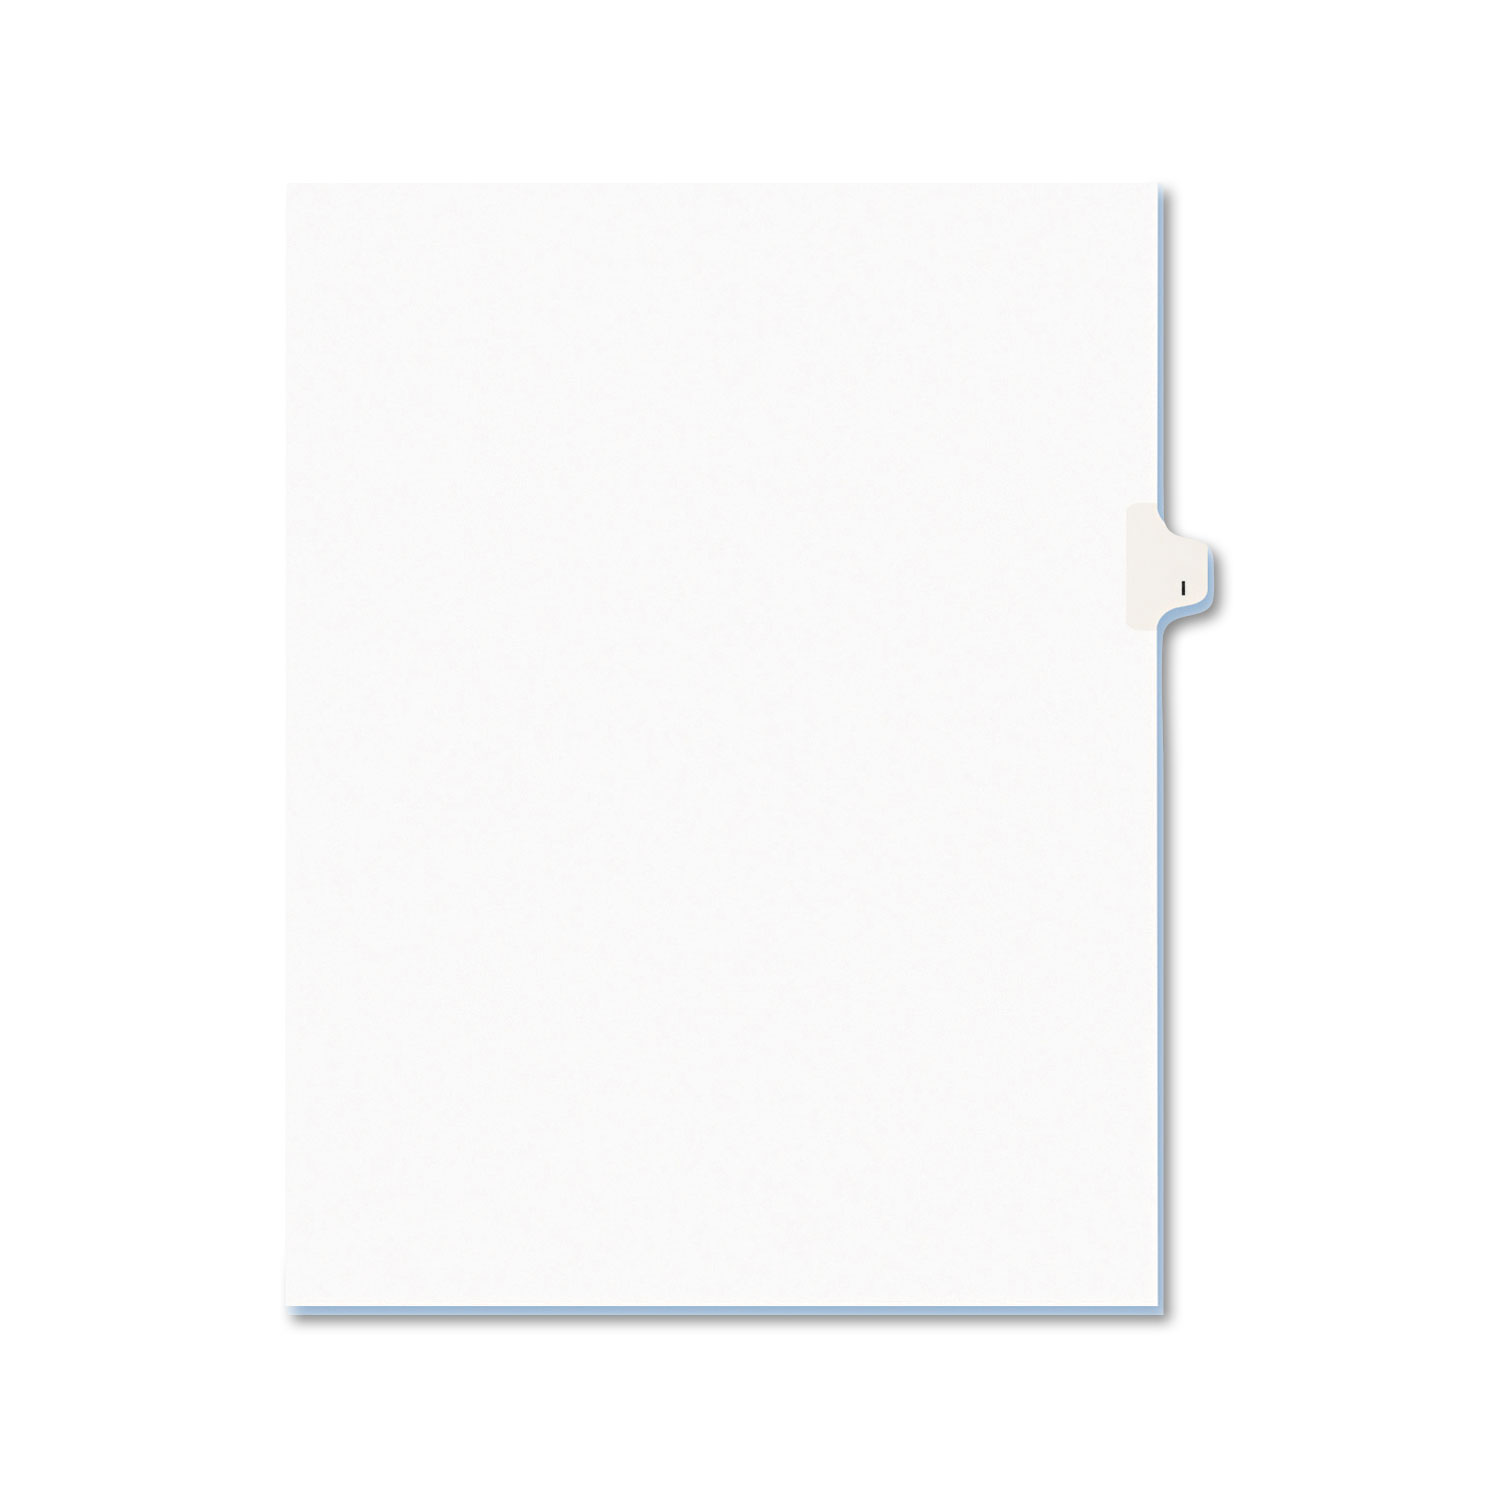  Avery 01409 Preprinted Legal Exhibit Side Tab Index Dividers, Avery Style, 26-Tab, I, 11 x 8.5, White, 25/Pack (AVE01409) 